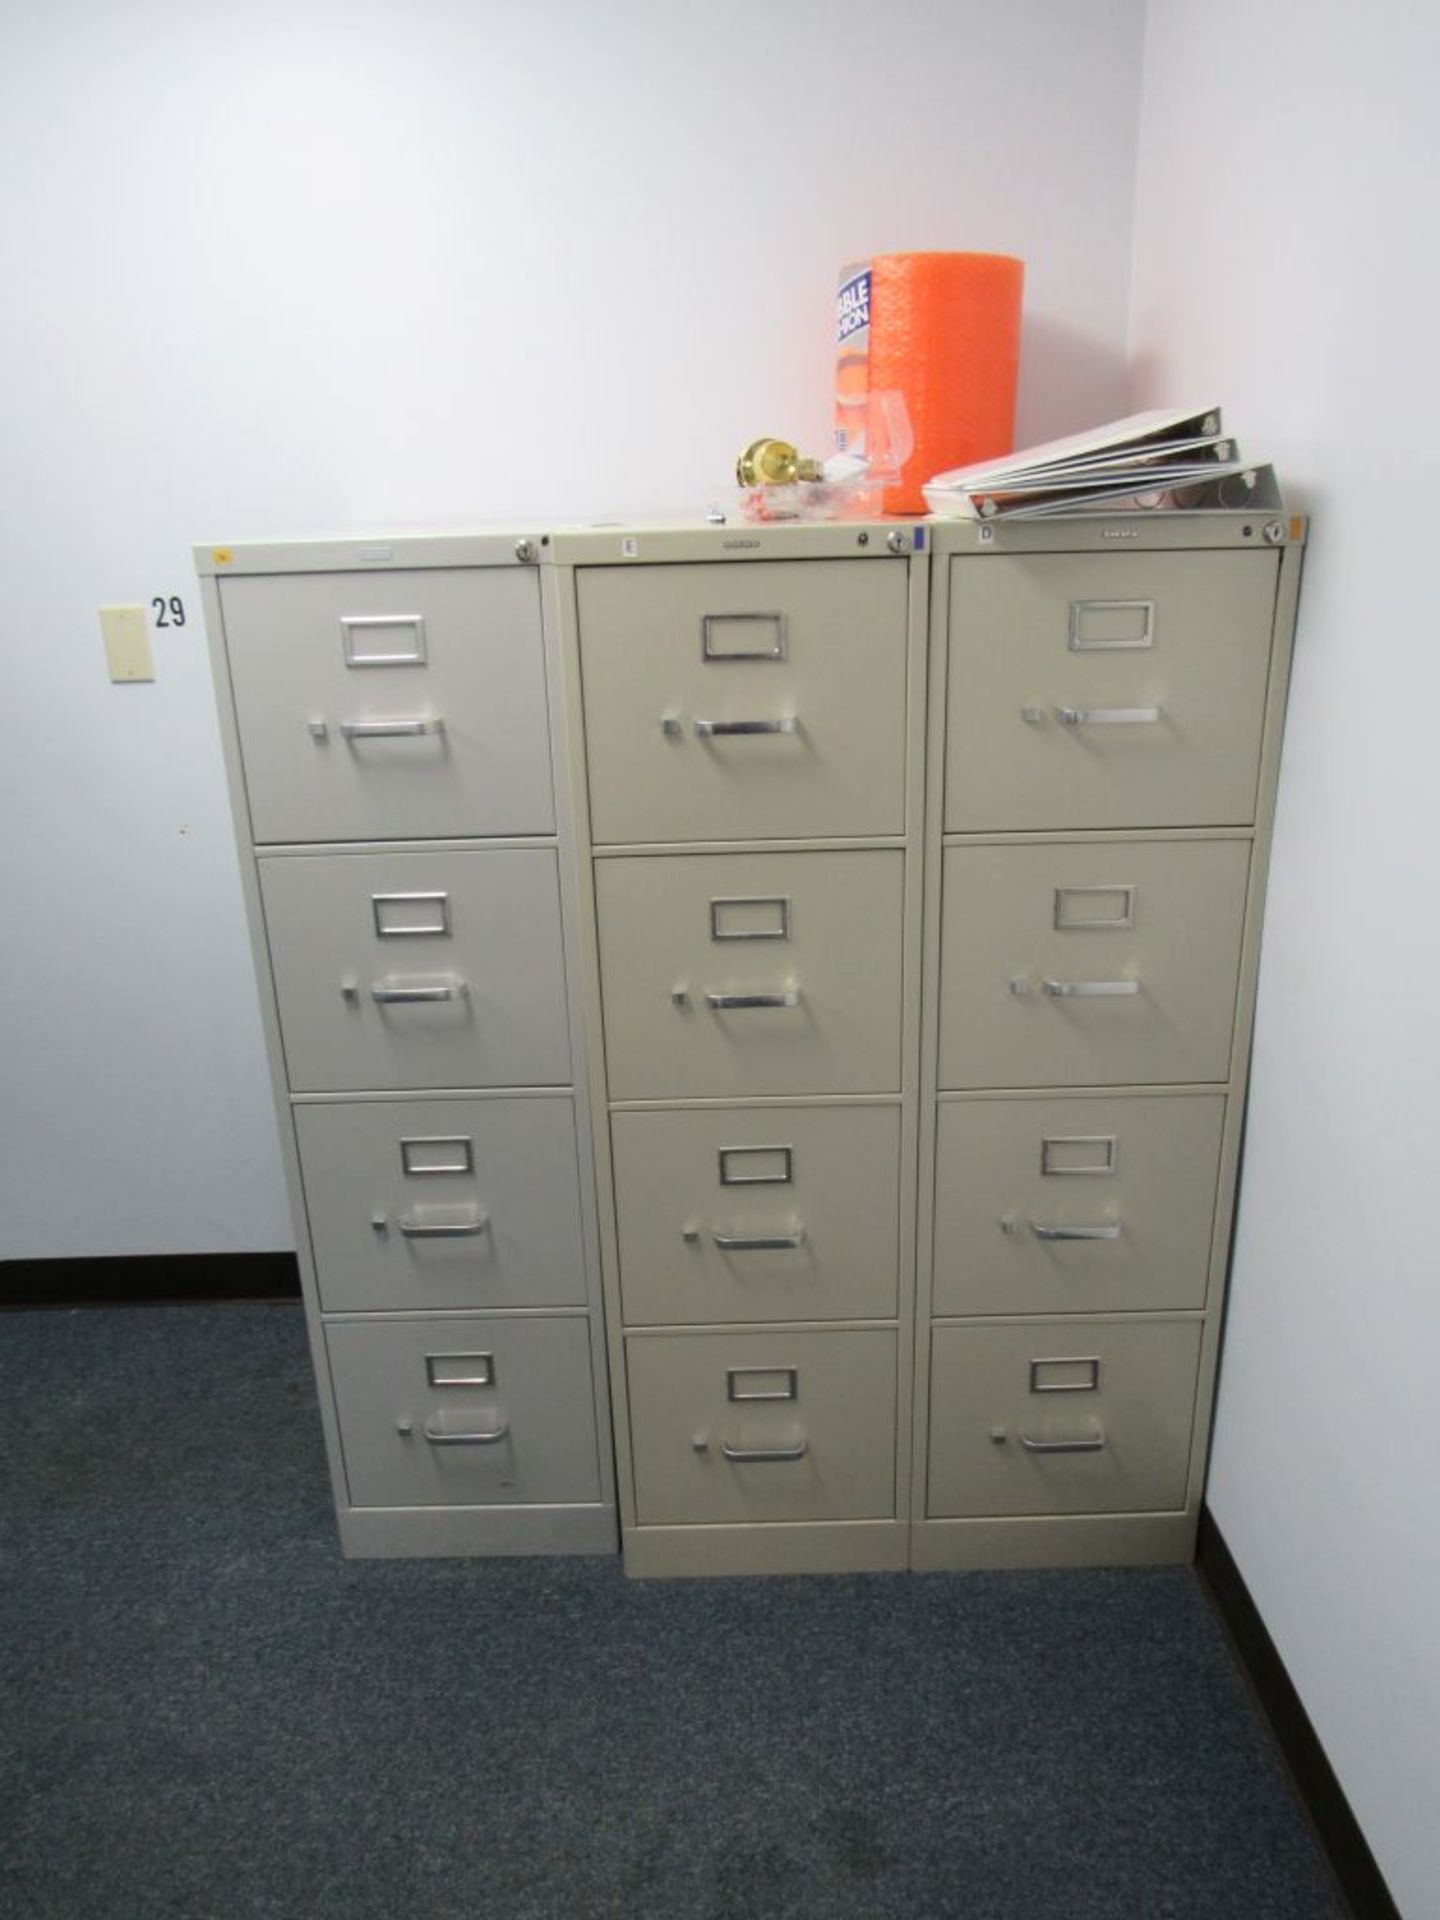 Lot of (3) File Cabinets and Shelves|Tag: 234912 - Image 2 of 2